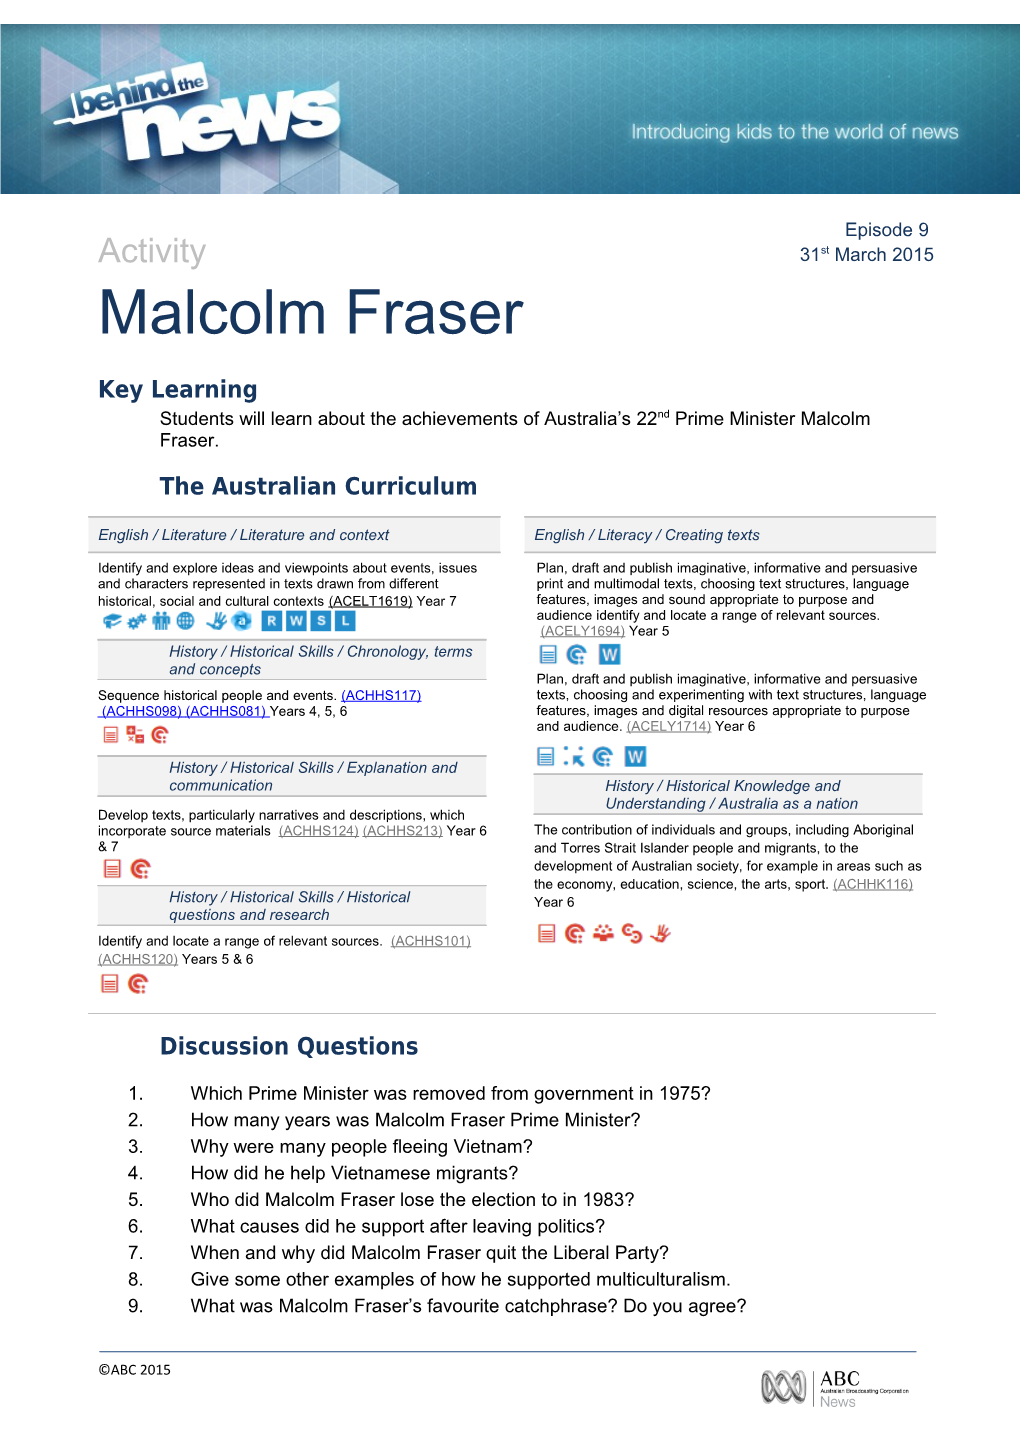 Students Will Learn About the Achievements of Australia S 22Nd Prime Minister Malcolm Fraser